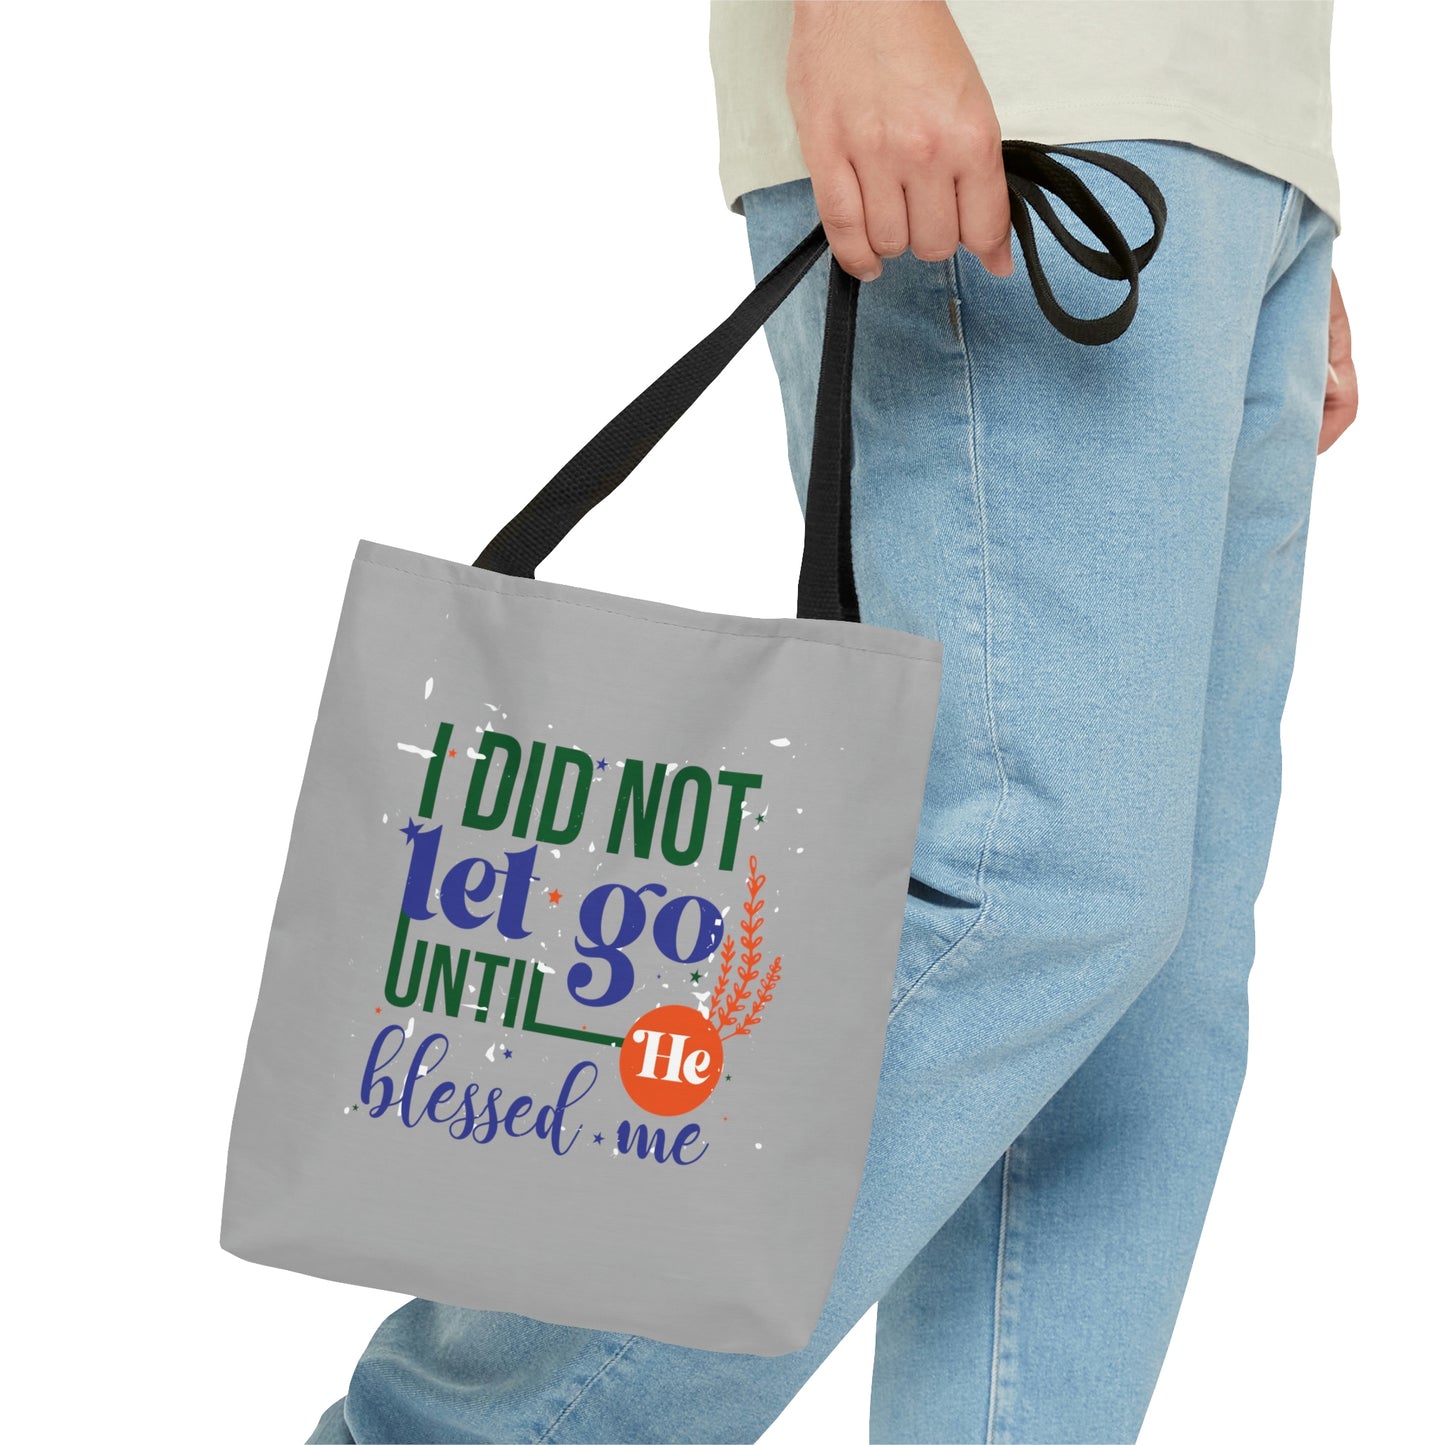 I Did Not Let Go Tote Bag